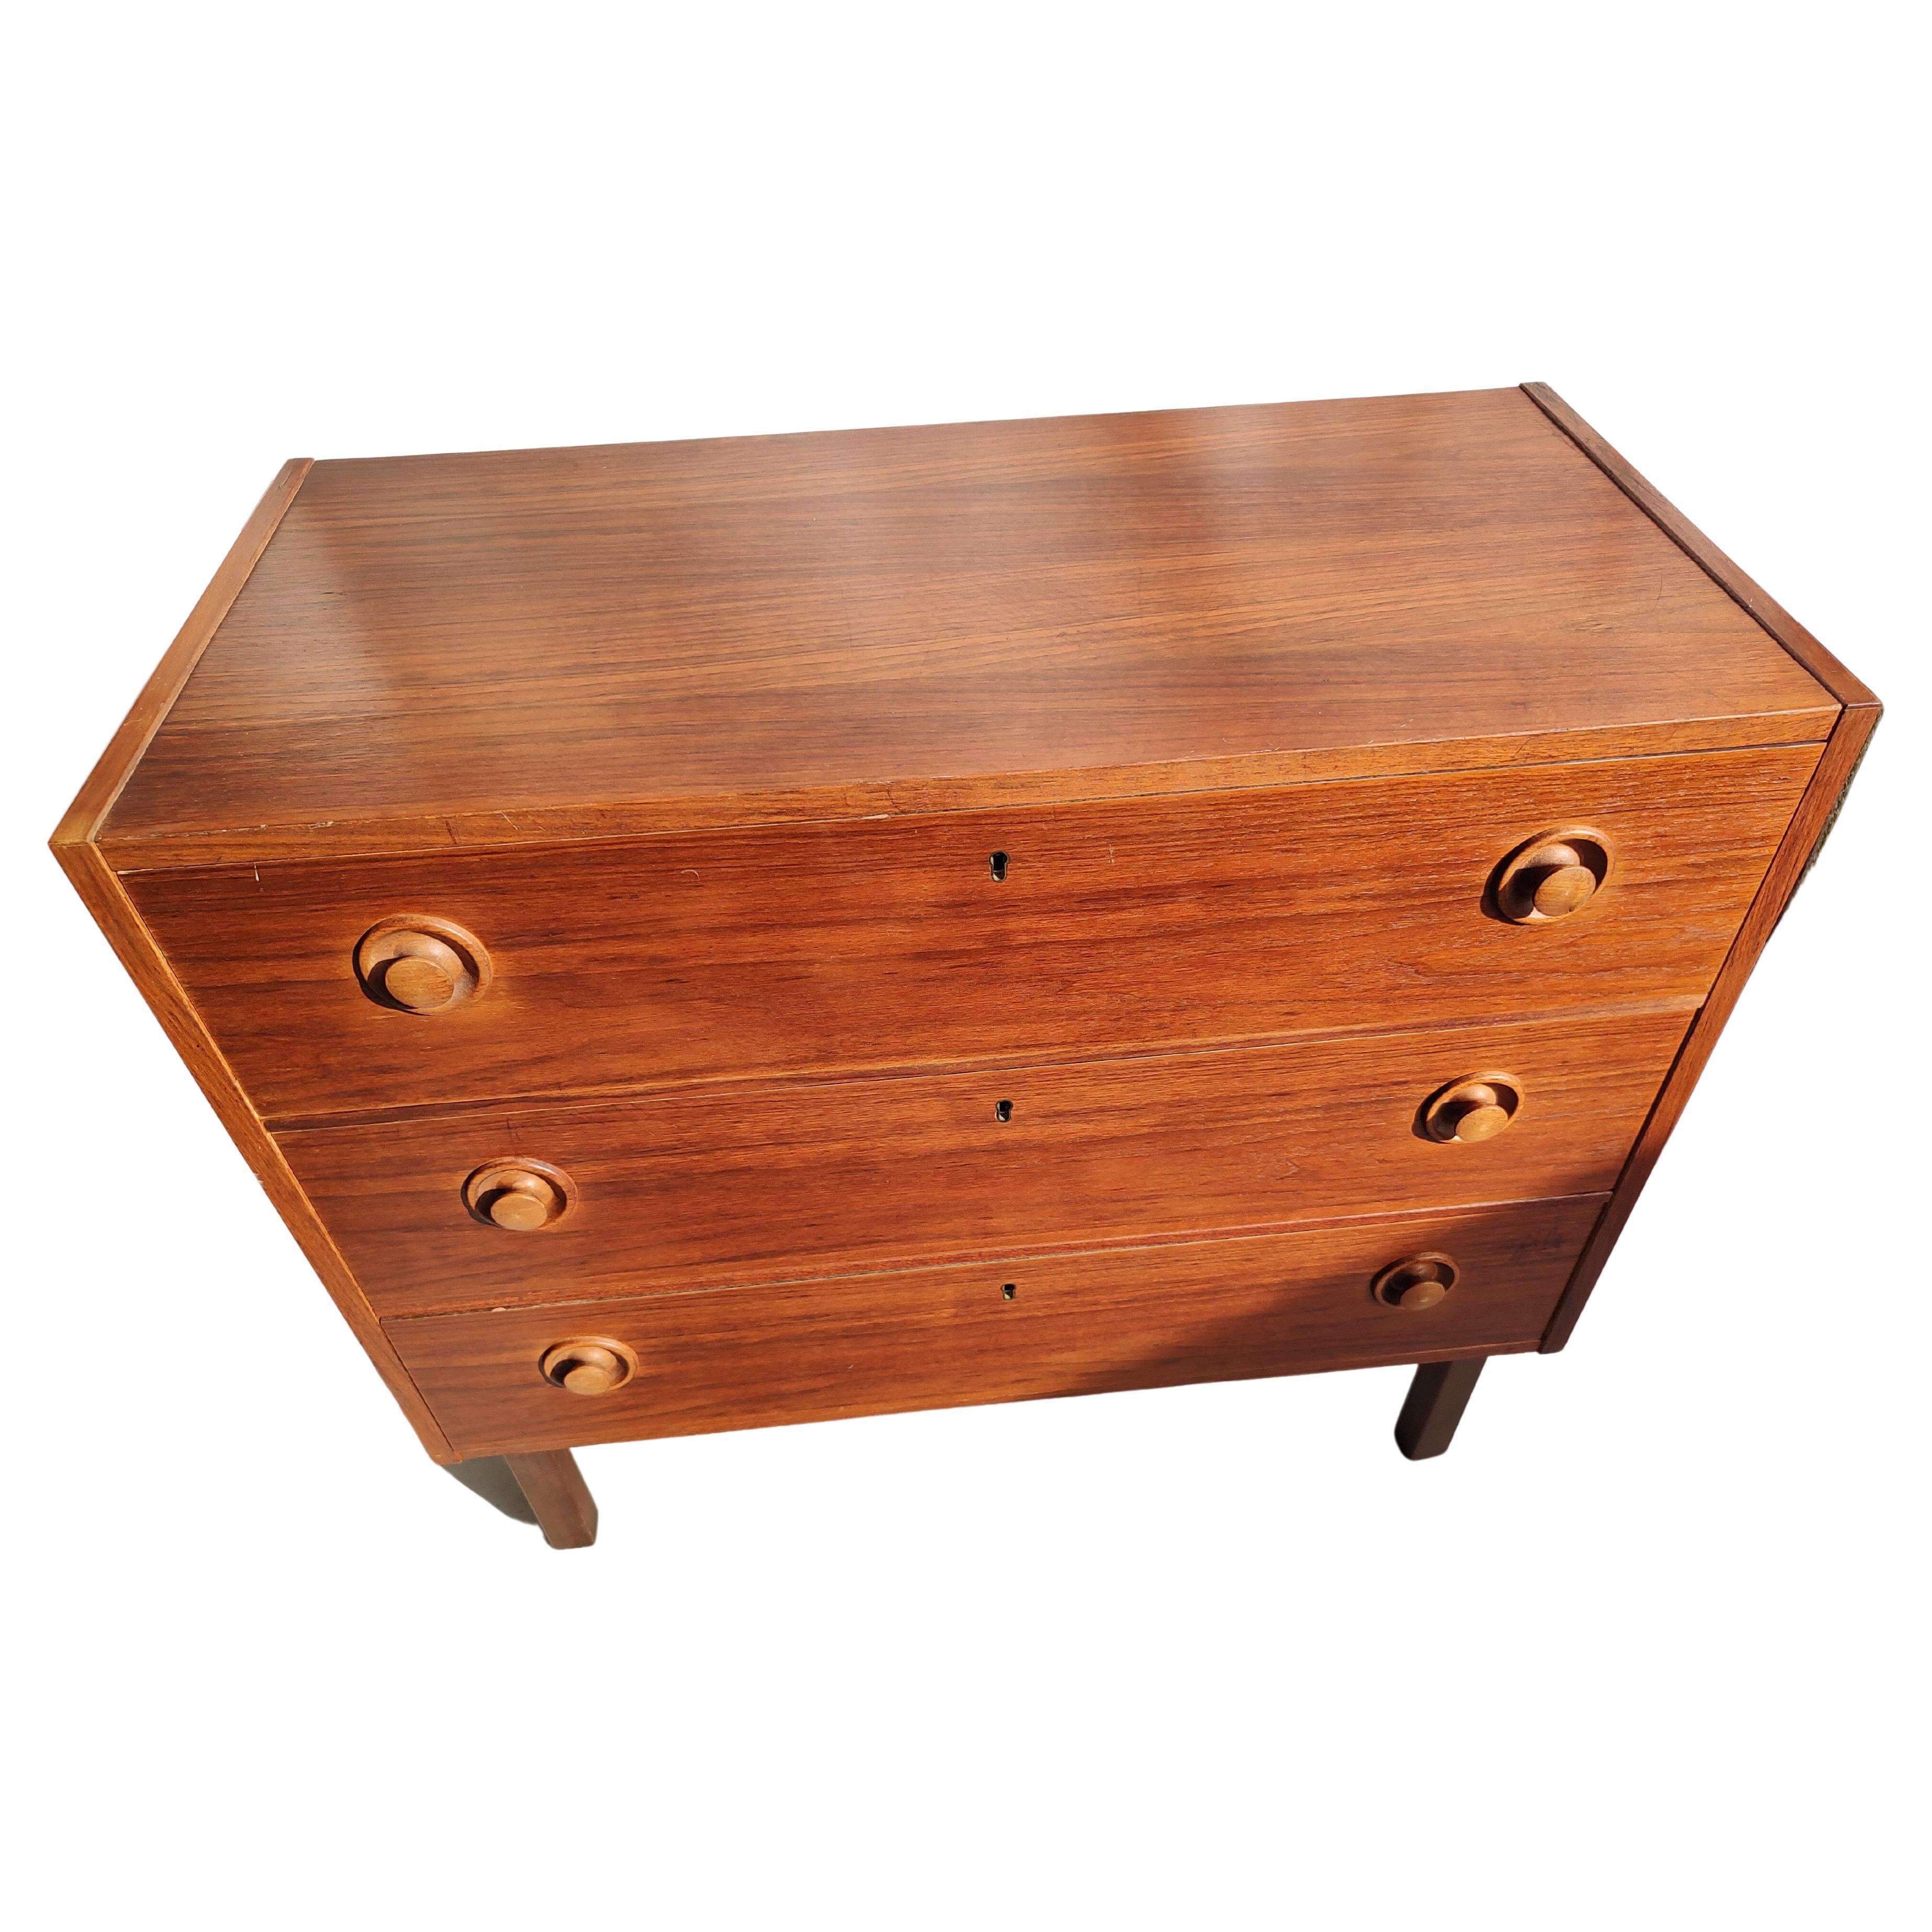 Mid-Century Modern Swedish Petite 3 Drawer Teak Dresser, circa 1970 In Good Condition For Sale In Port Jervis, NY